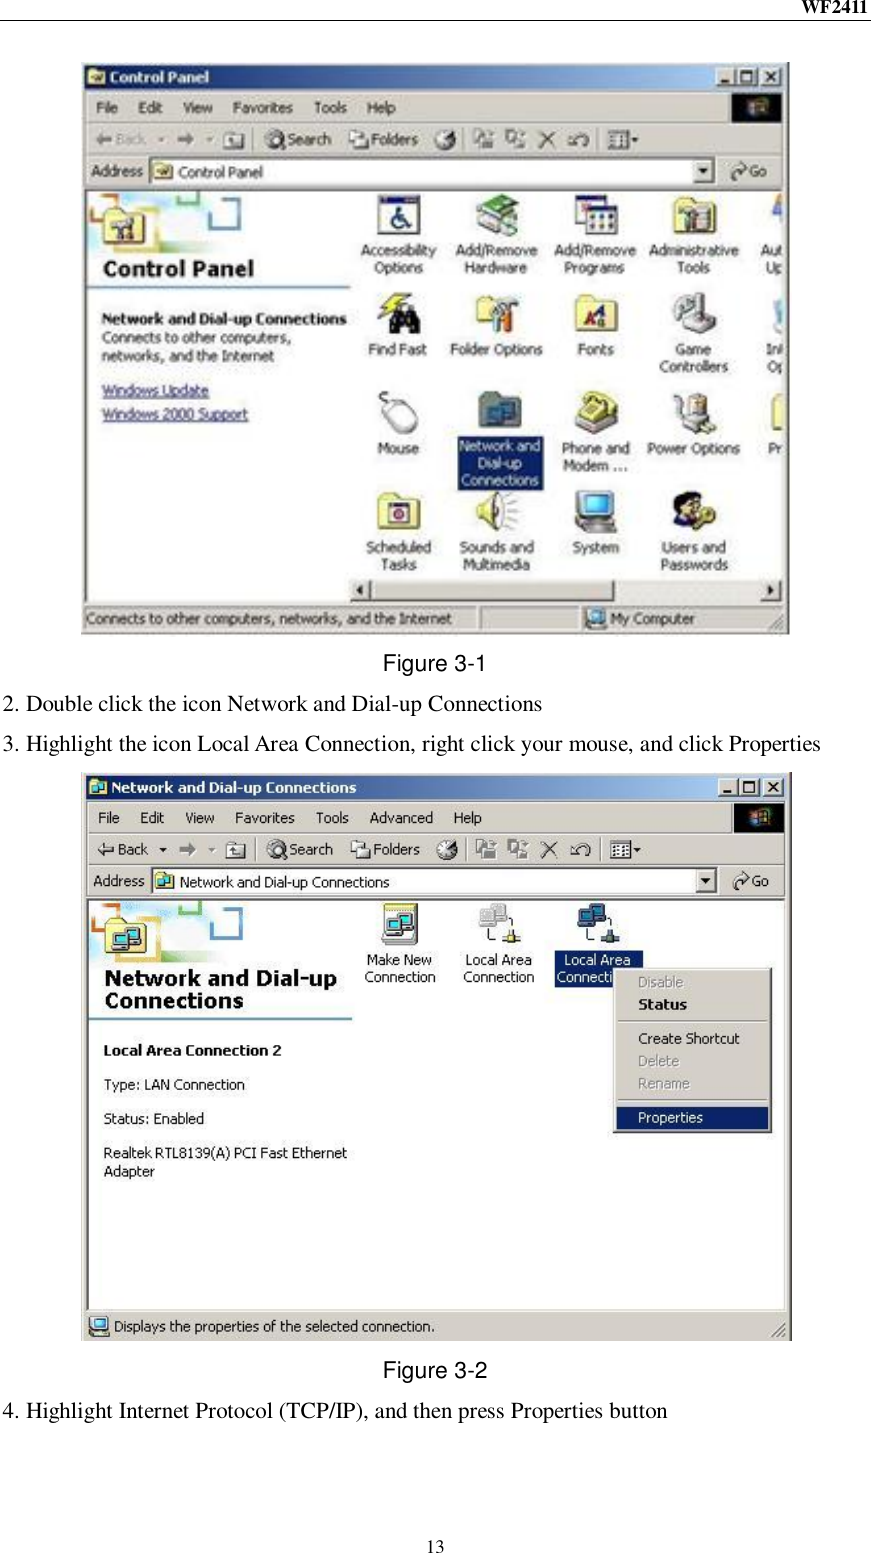 WF2411  13  Figure 3-1 2. Double click the icon Network and Dial-up Connections 3. Highlight the icon Local Area Connection, right click your mouse, and click Properties  Figure 3-2 4. Highlight Internet Protocol (TCP/IP), and then press Properties button 